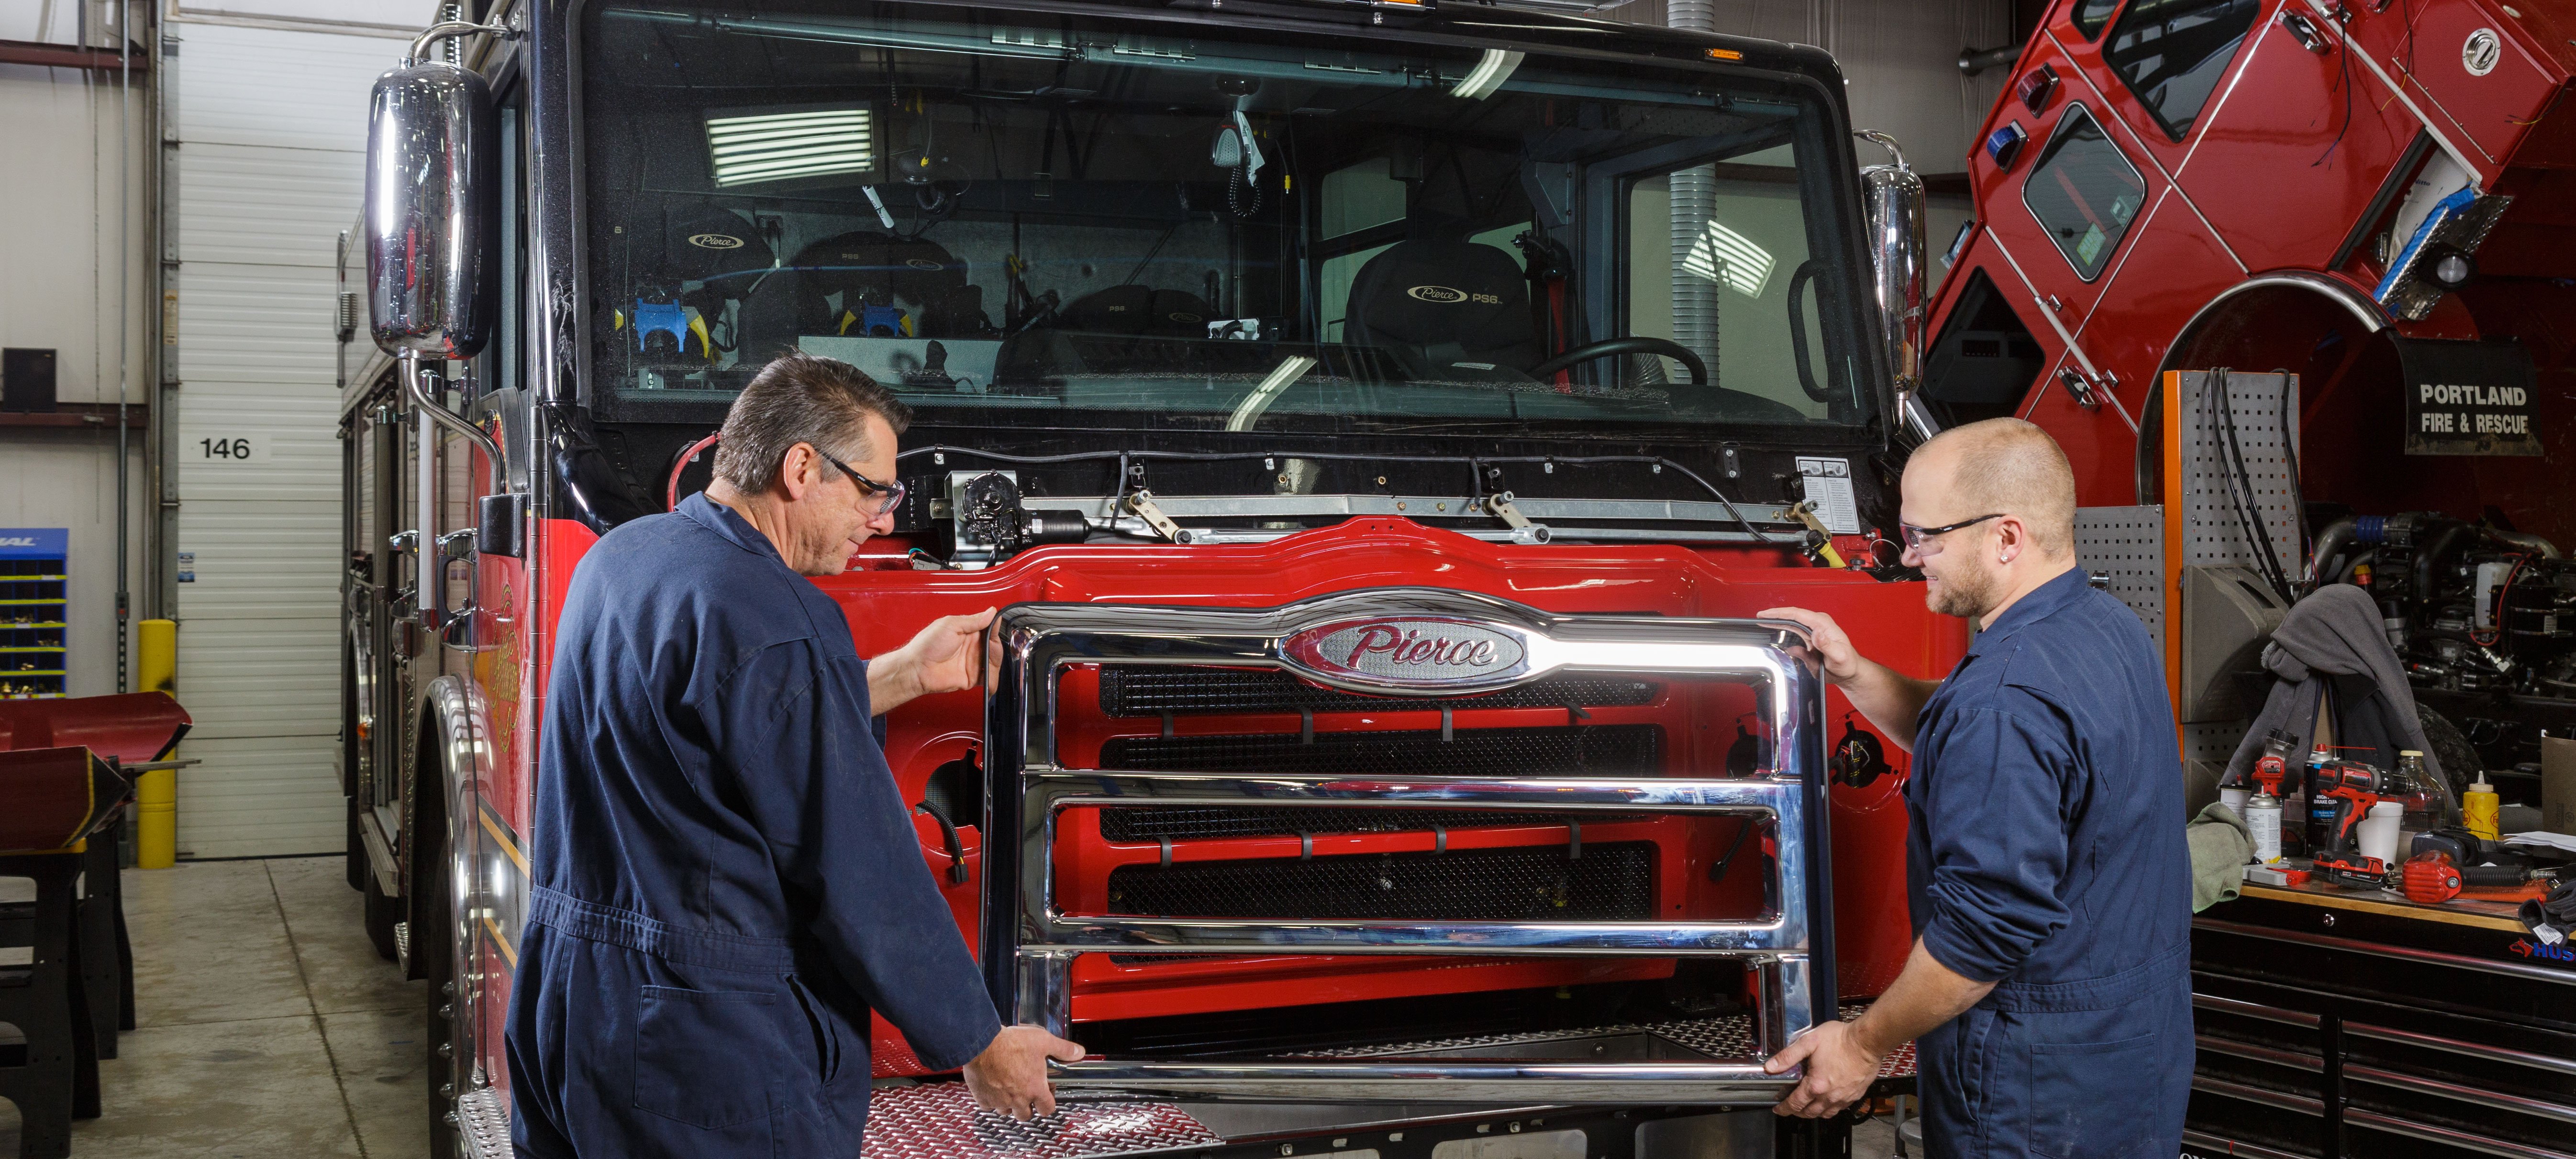 Two individuals putting parts on the front of a Pierce Fire Truck parked inside of a warehouse.  